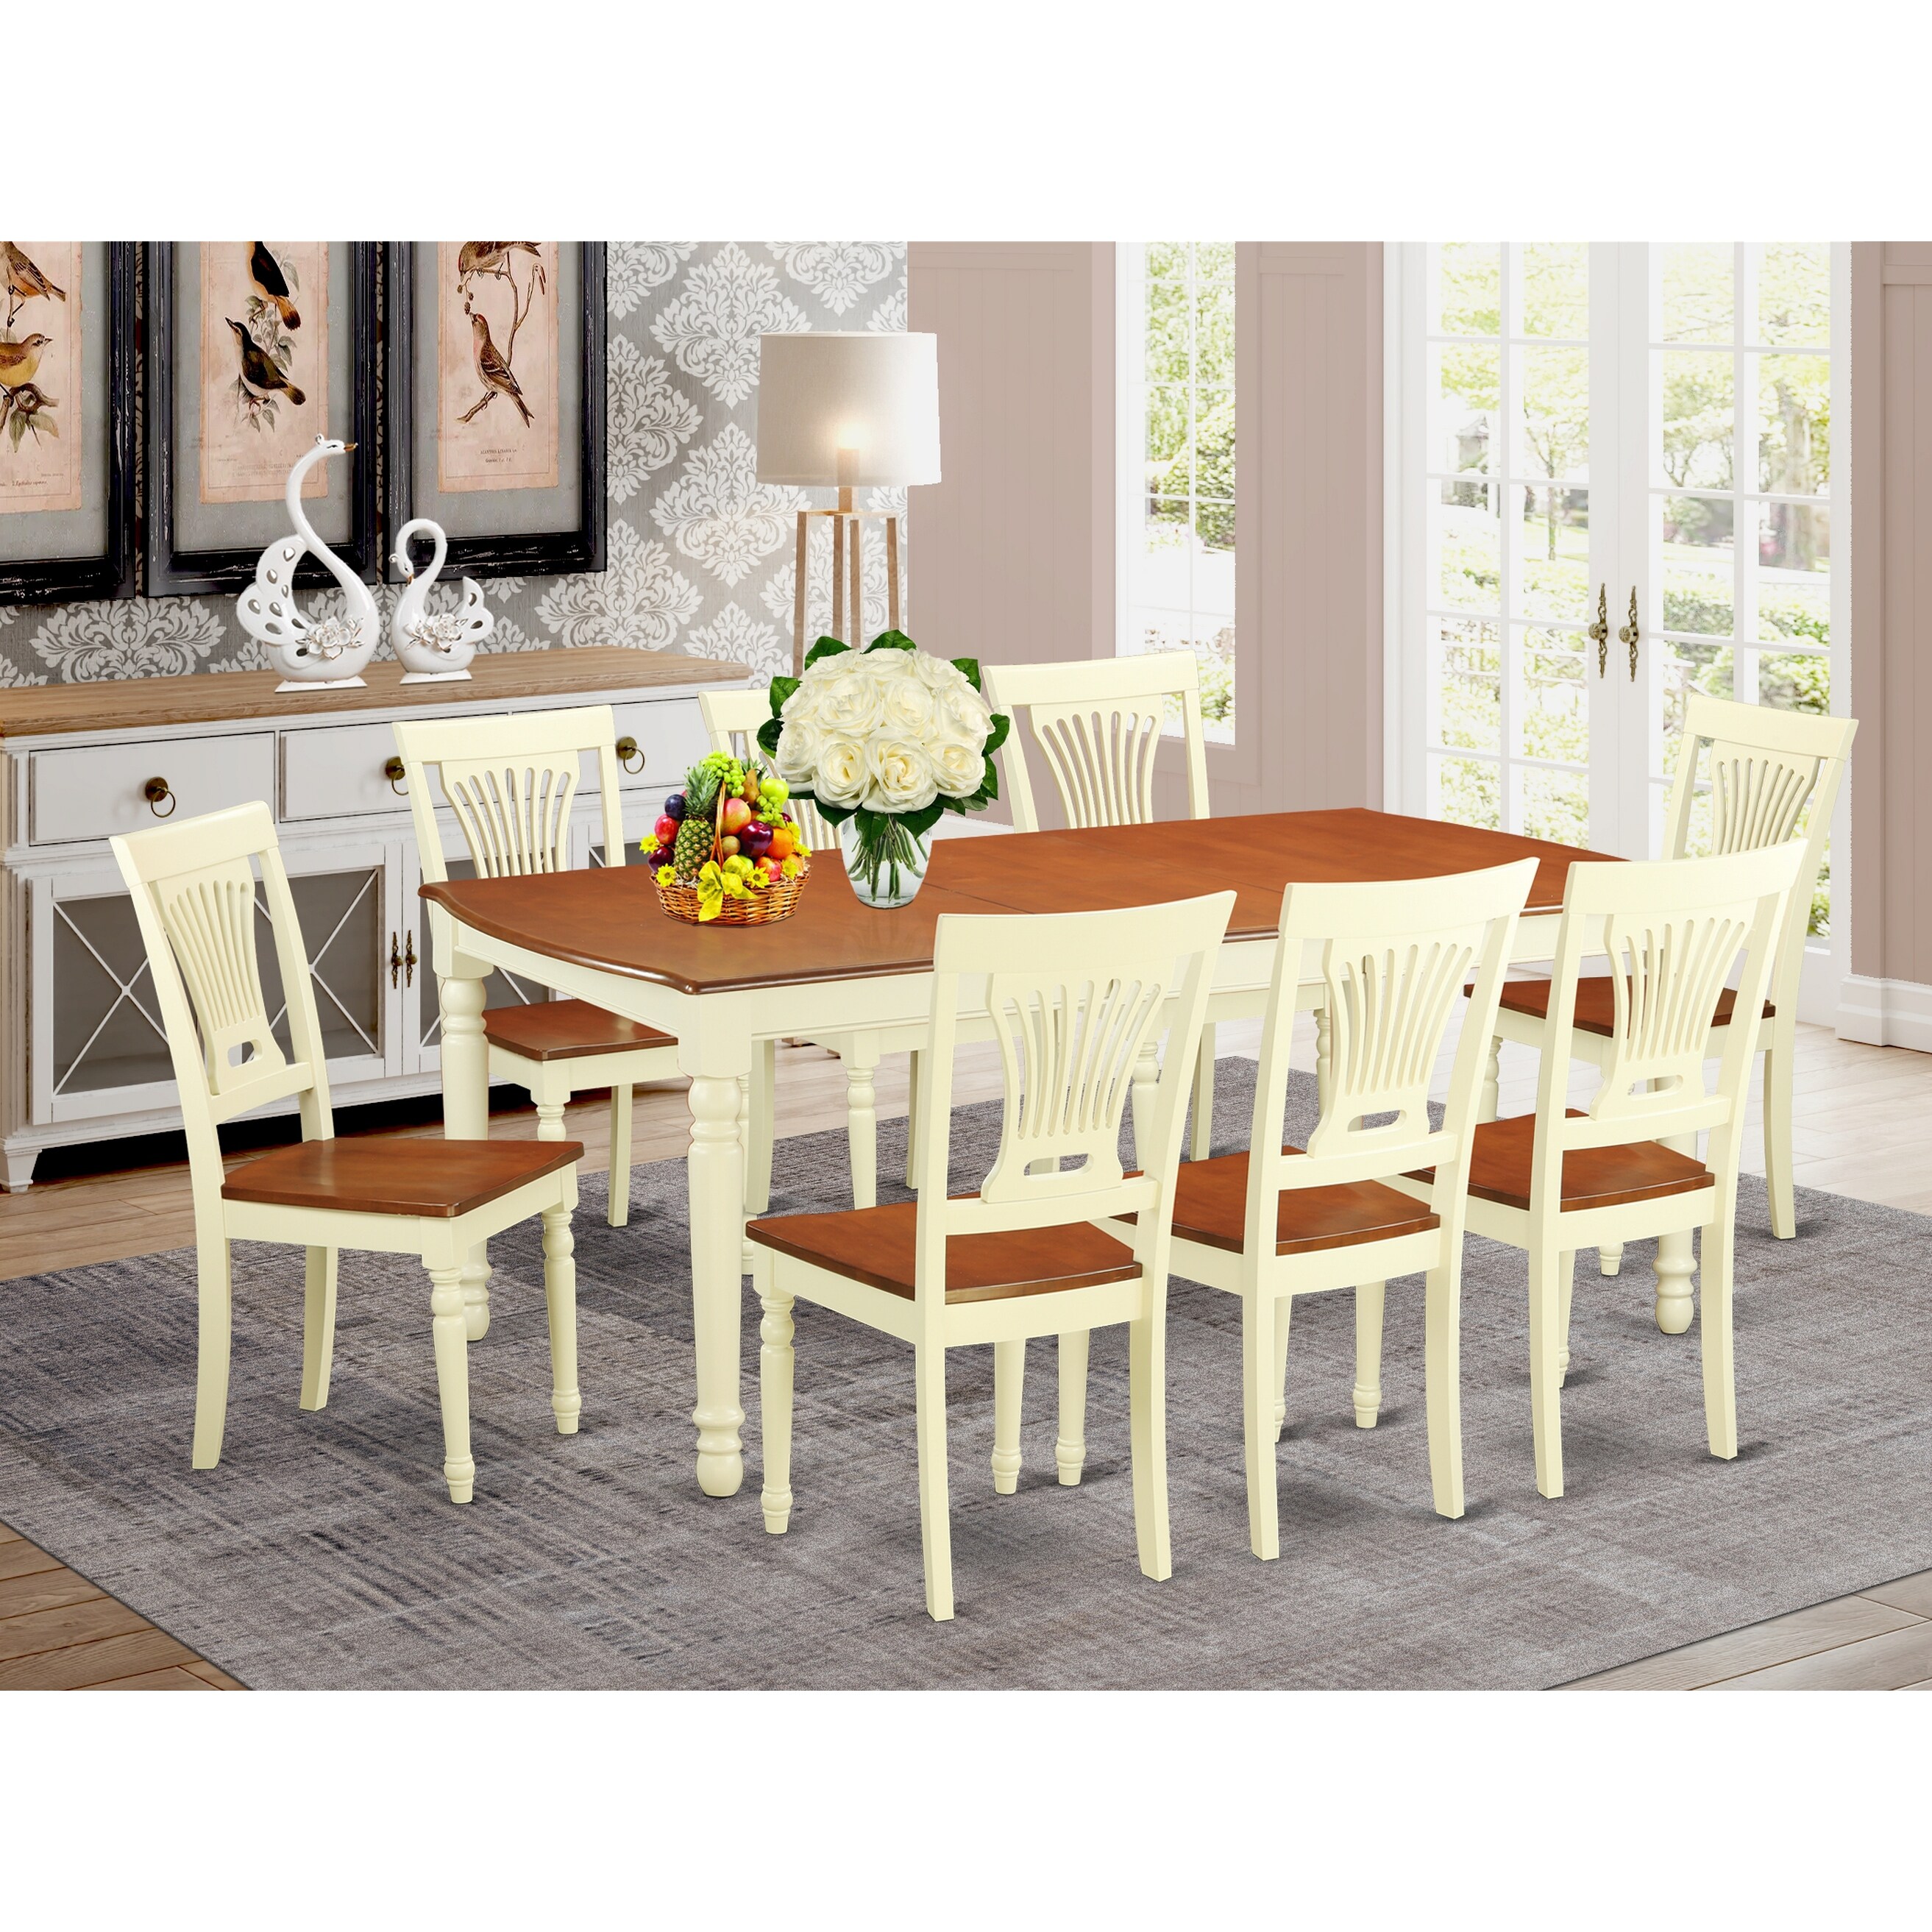 Modern 9 Pc Dinette Set - A Kitchen Table And 8 Dining Chairs - Buttermilk And Cherry Finish (chair Seats Option)